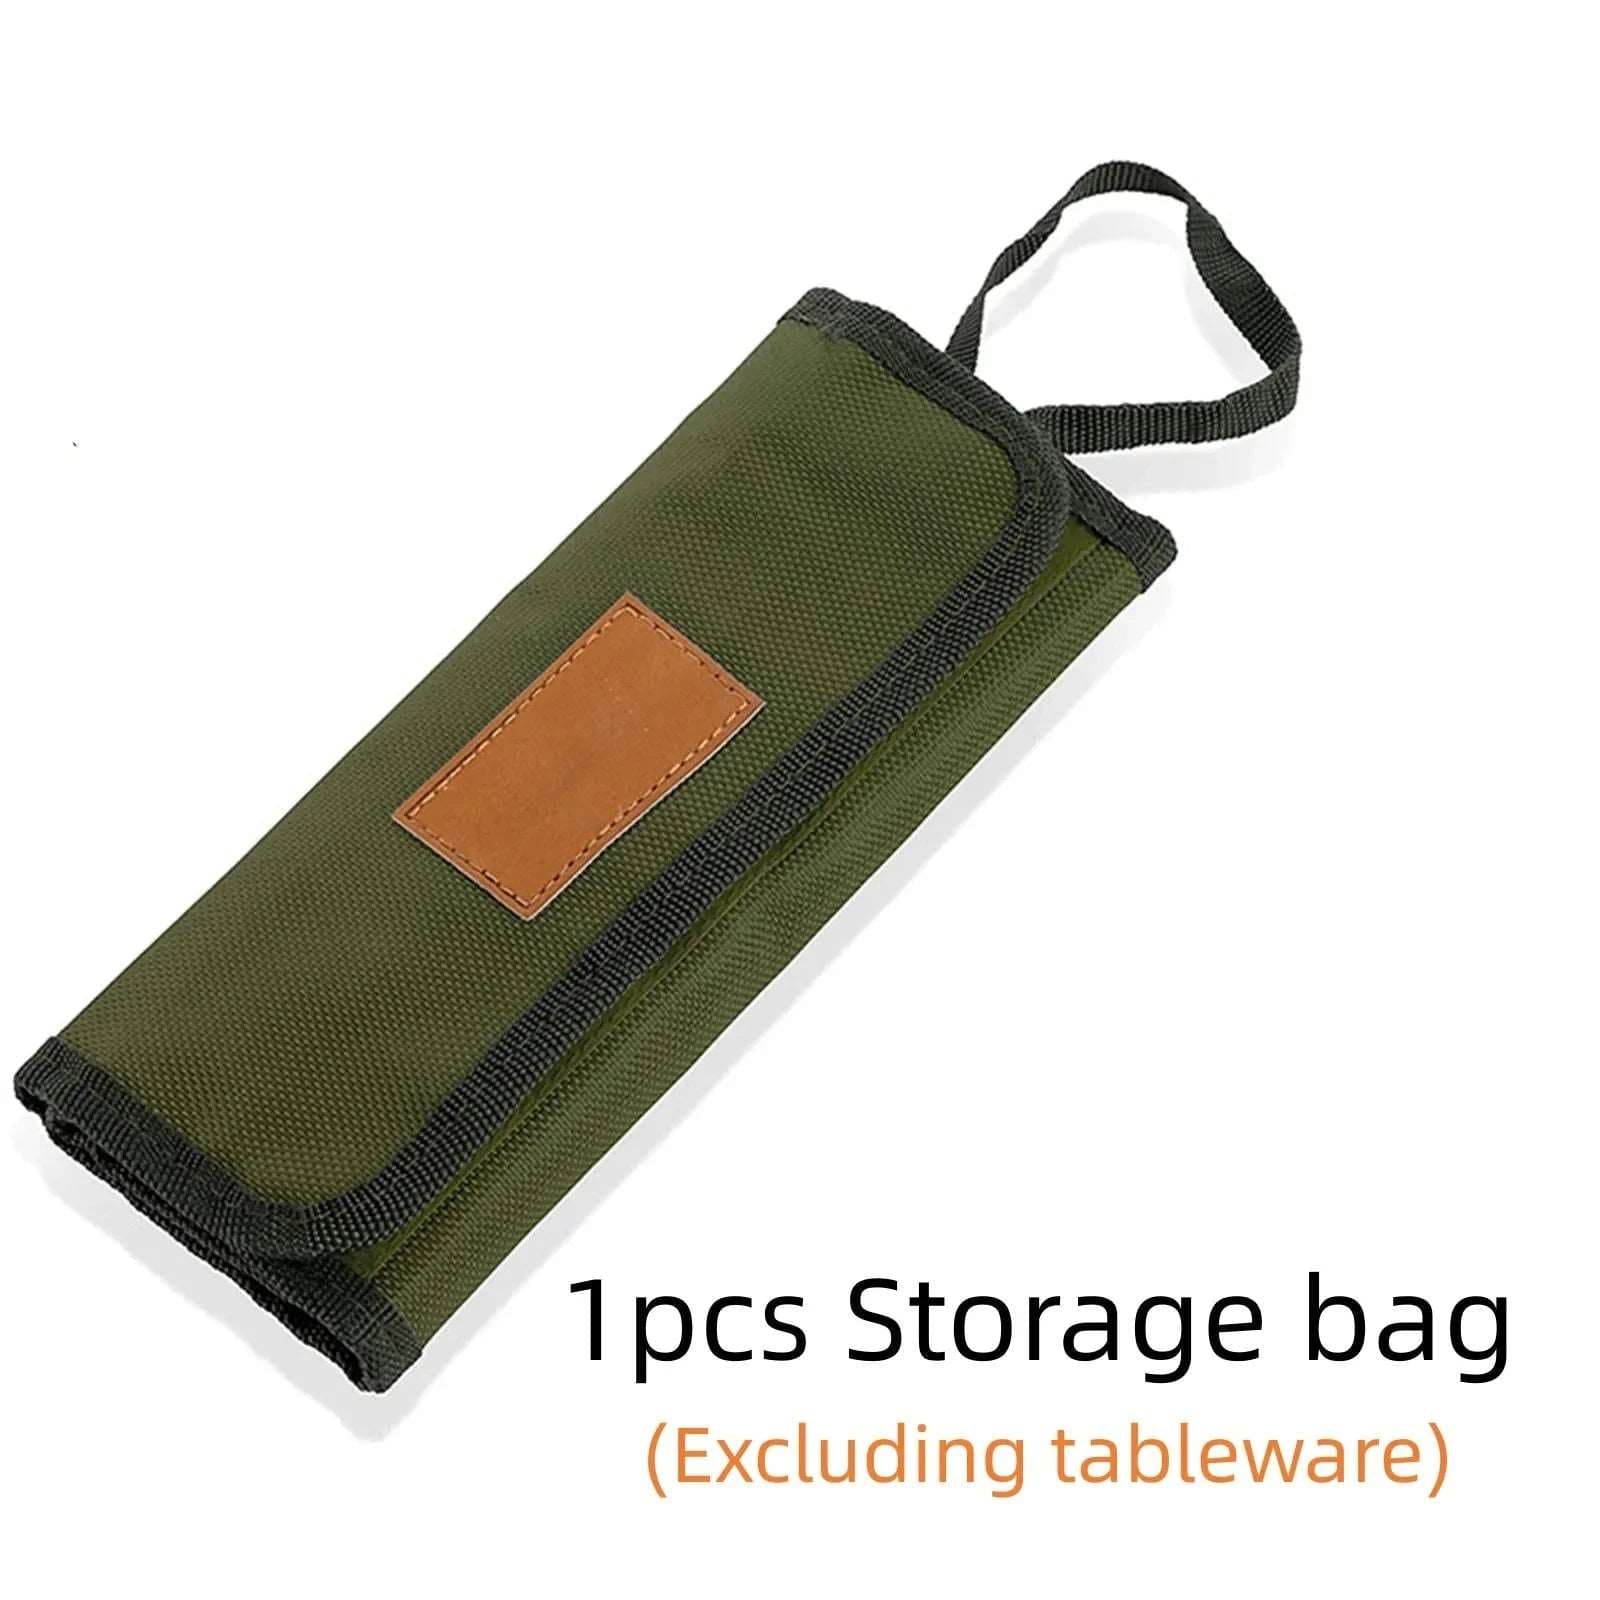 Durable Polyester Cutlery Storage Bag - Portable, Water-Resistant, Ideal for Camping Gear - Betatton - 